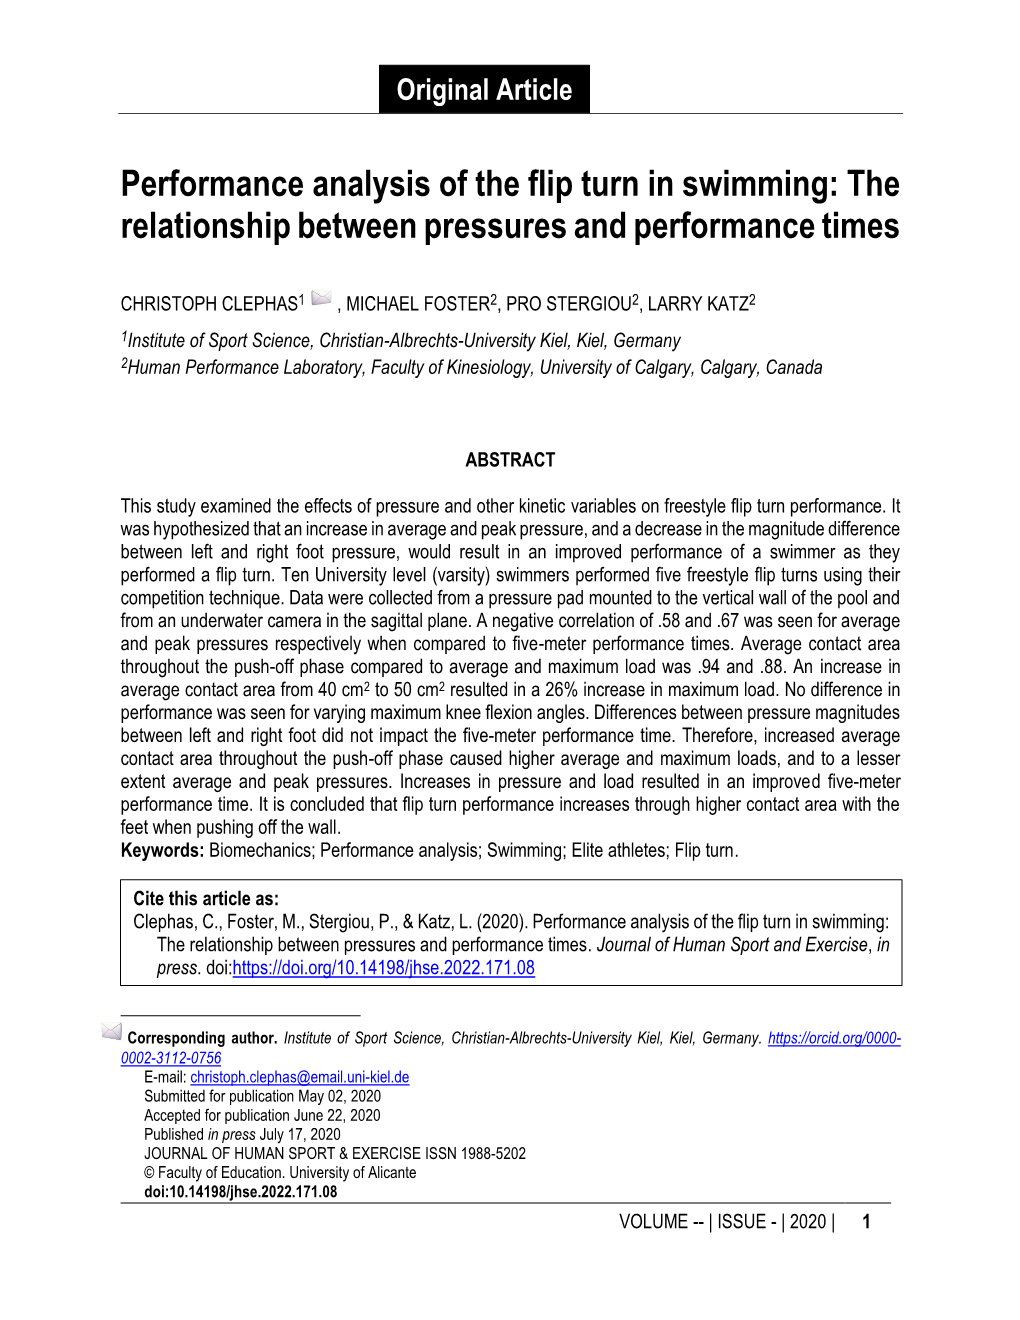 Performance Analysis of the Flip Turn in Swimming: the Relationship Between Pressures and Performance Times